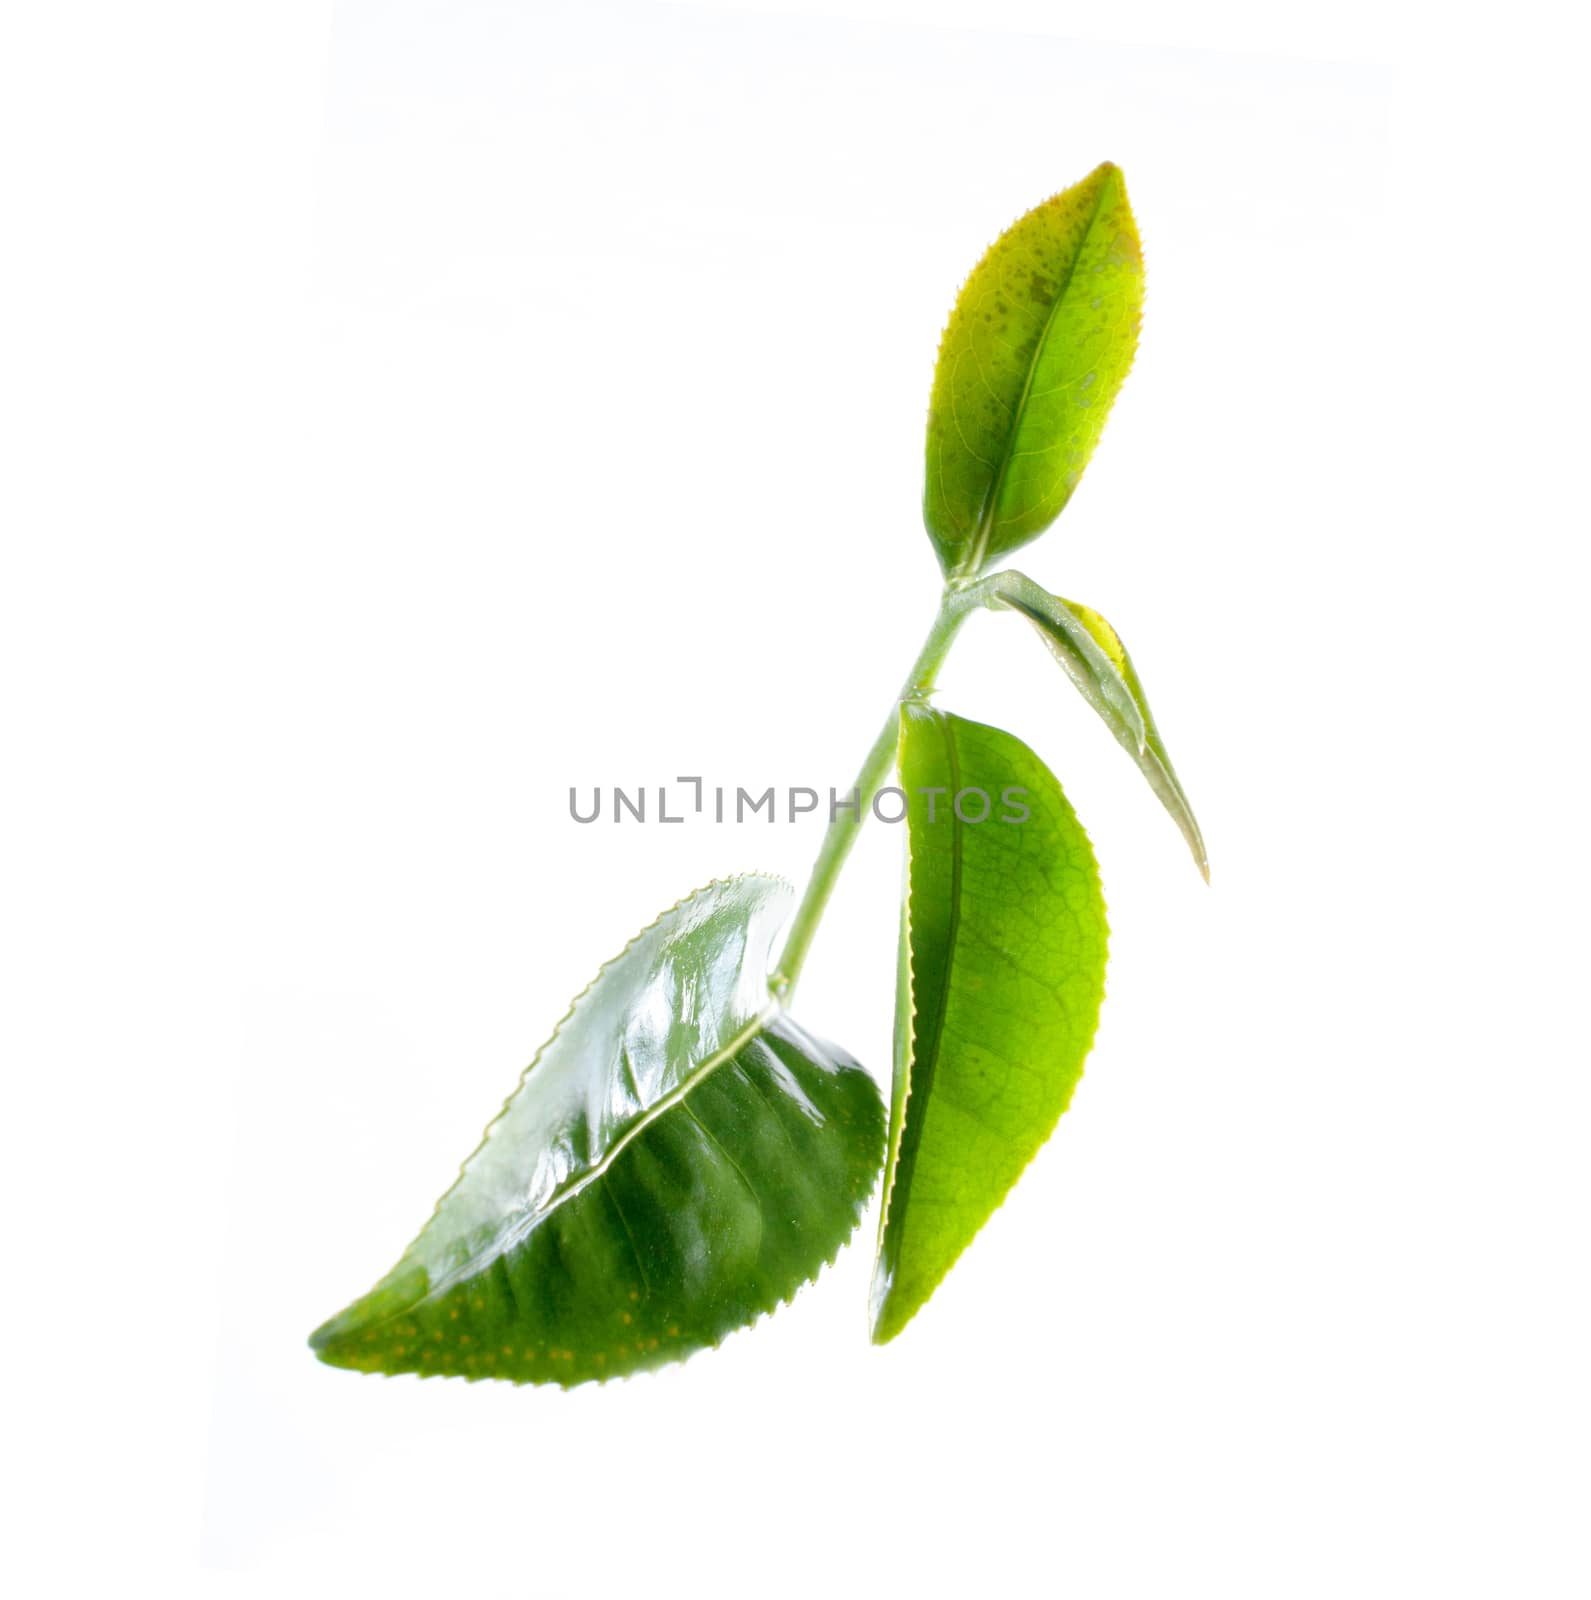 green tea leaves close up on white background
